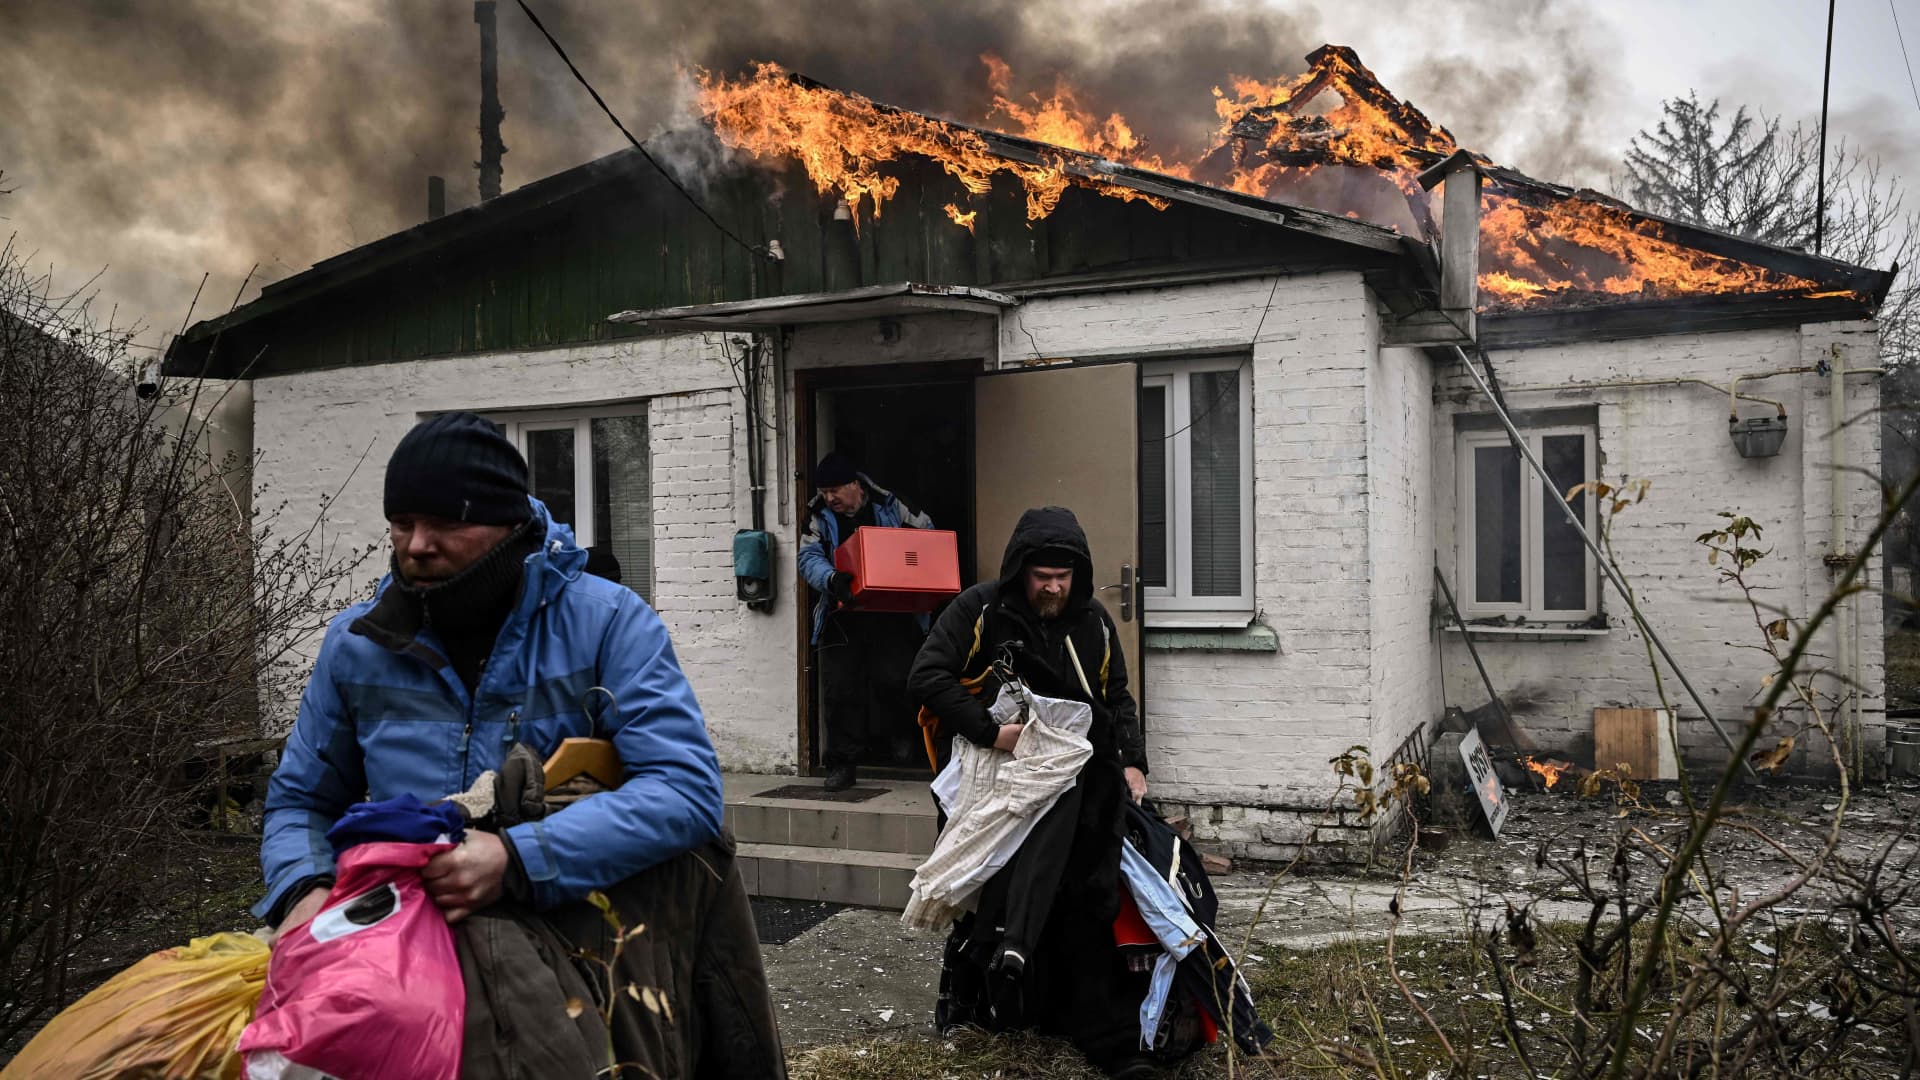 People remove personal belongings from a burning house after being shelled in the city of Irpin, outside Kyiv, Ukraine, on March 4, 2022.